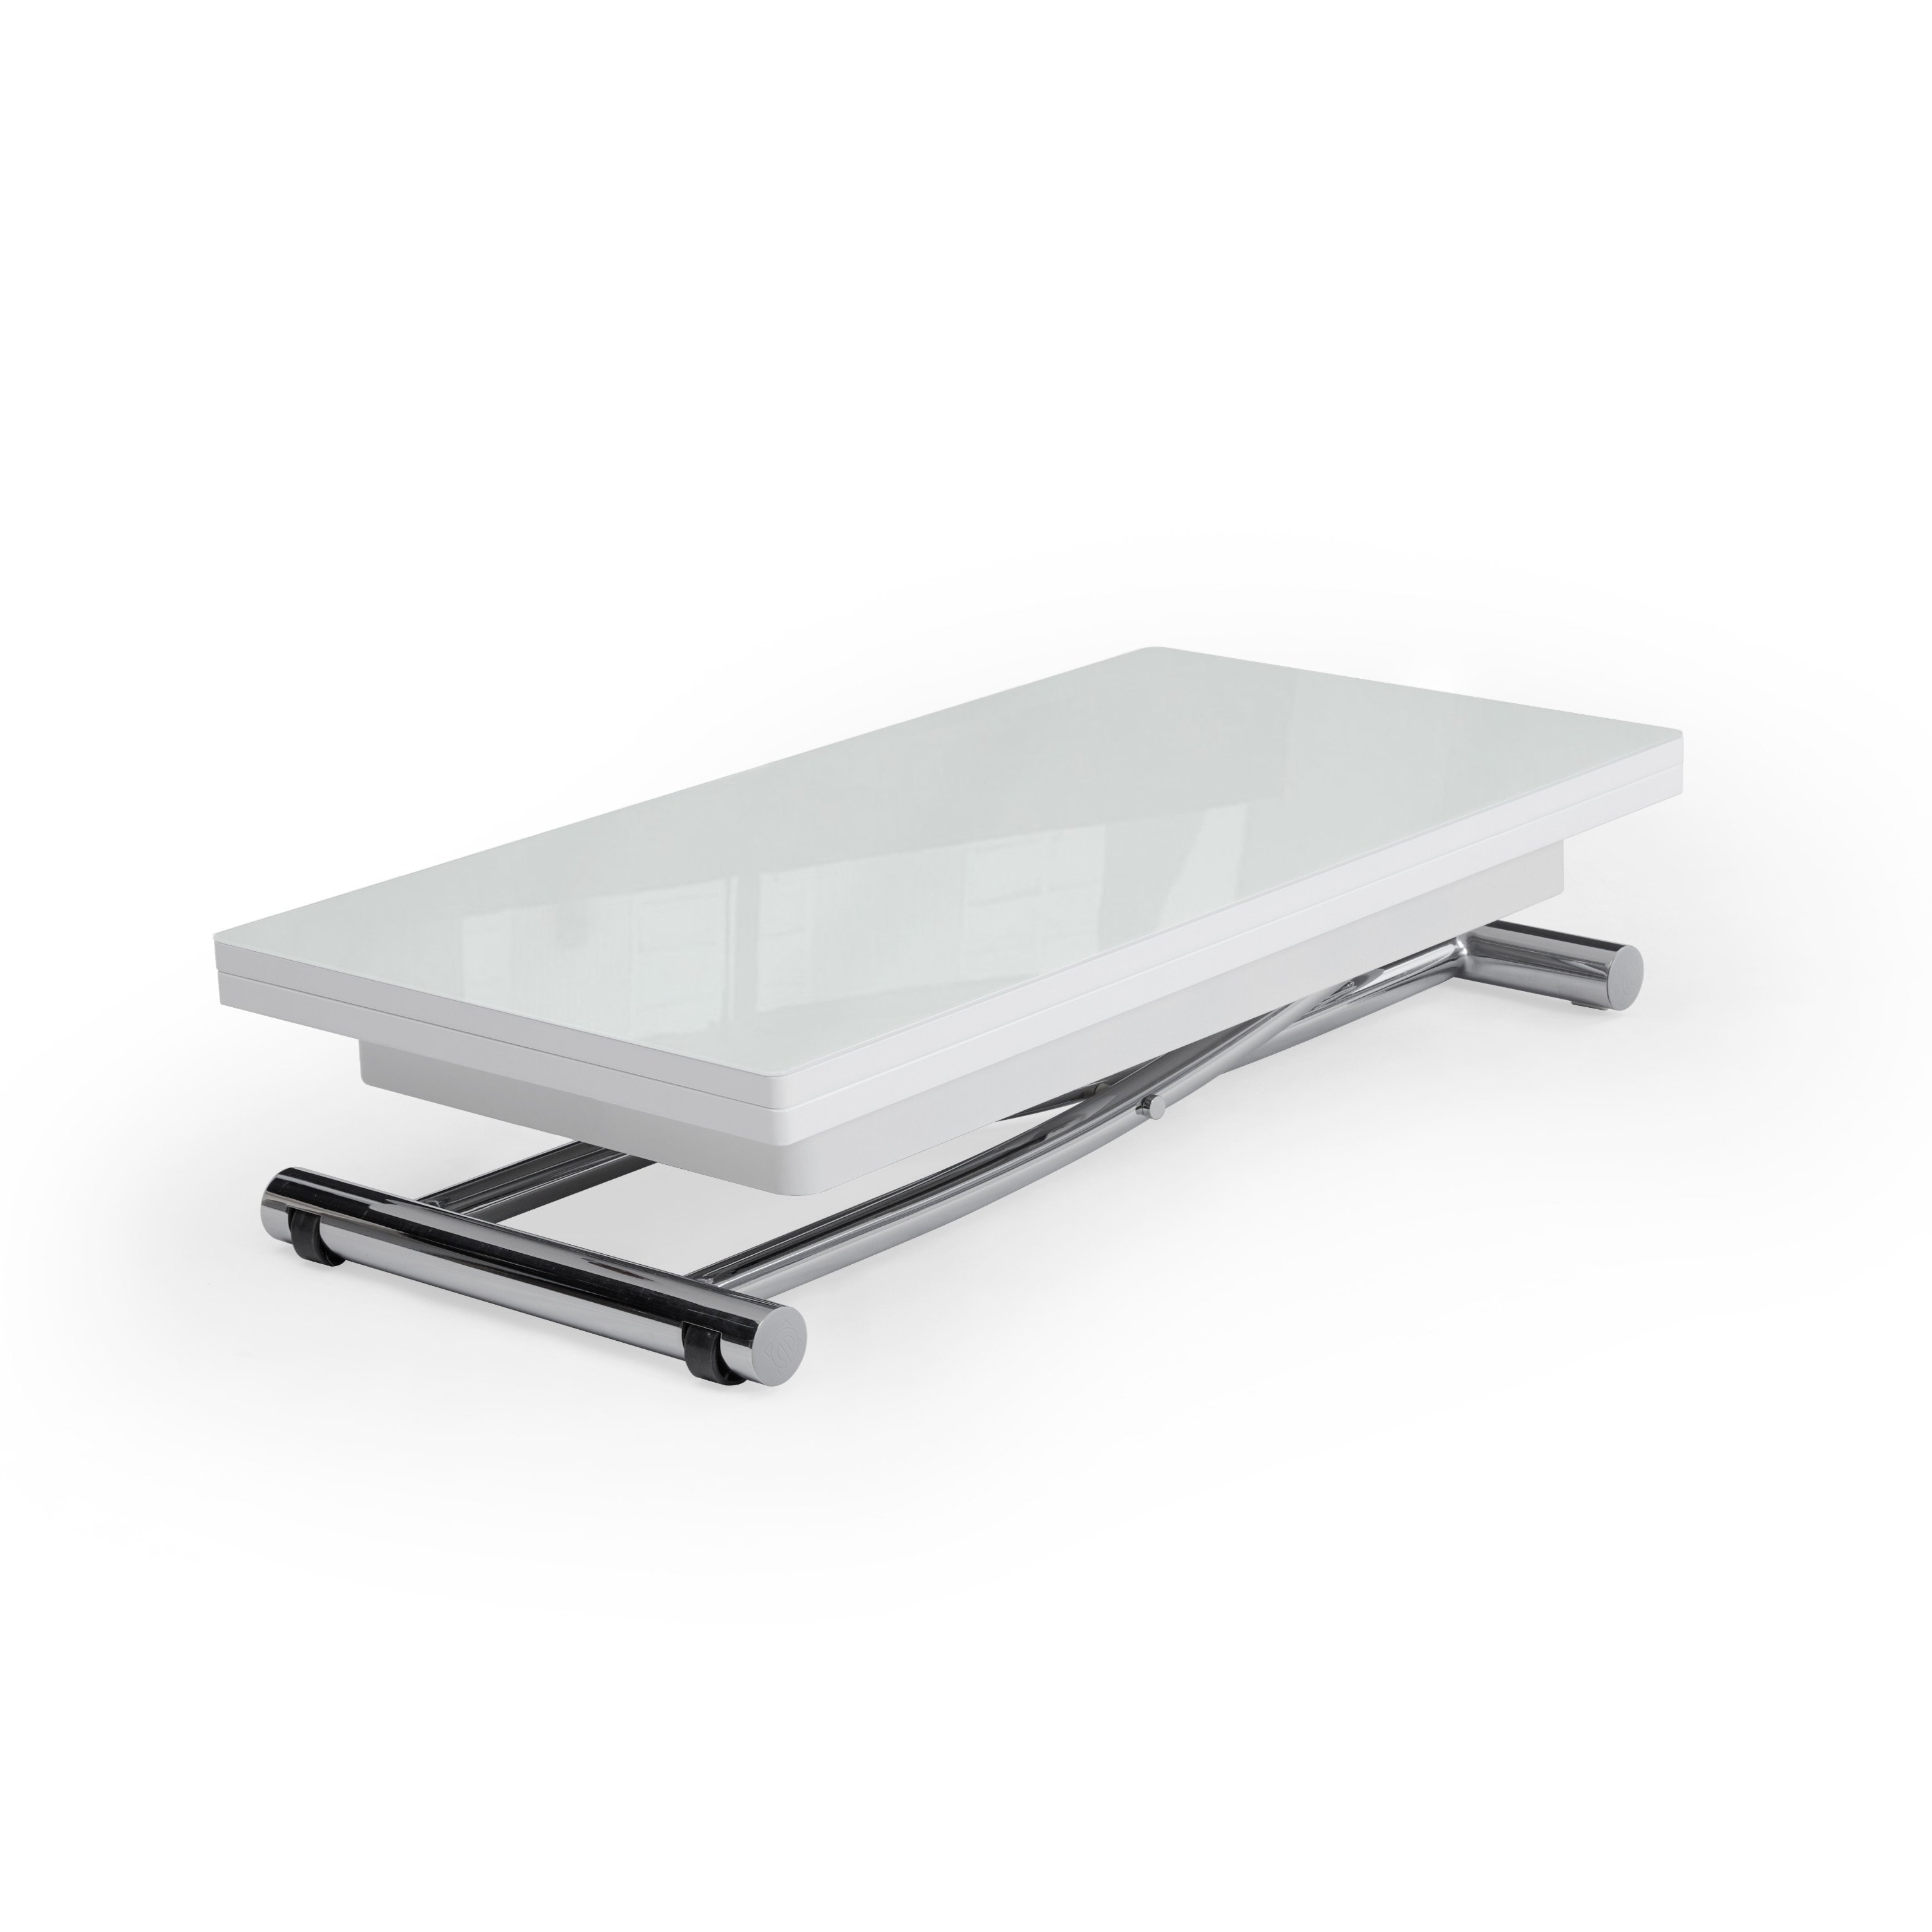 https://expandfurniture.com/wp-content/uploads/2013/05/TR4-Transforming-Table-coffee-convertible-dinner-table-in-white-gloss-and-chrome-metal.jpg